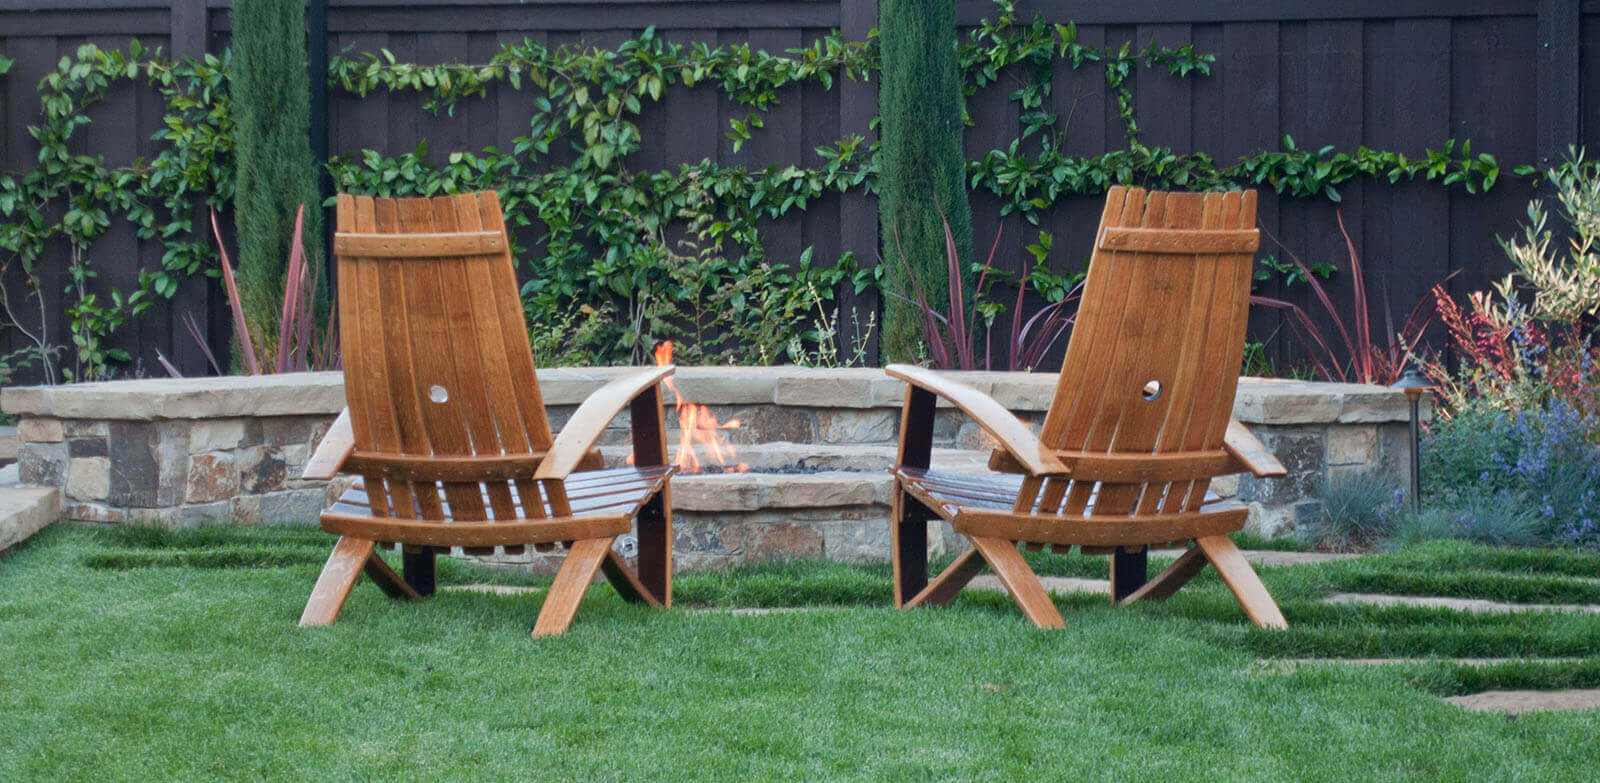 Low round firepit set in lawn with Adirondack chairs and low stone seat wall